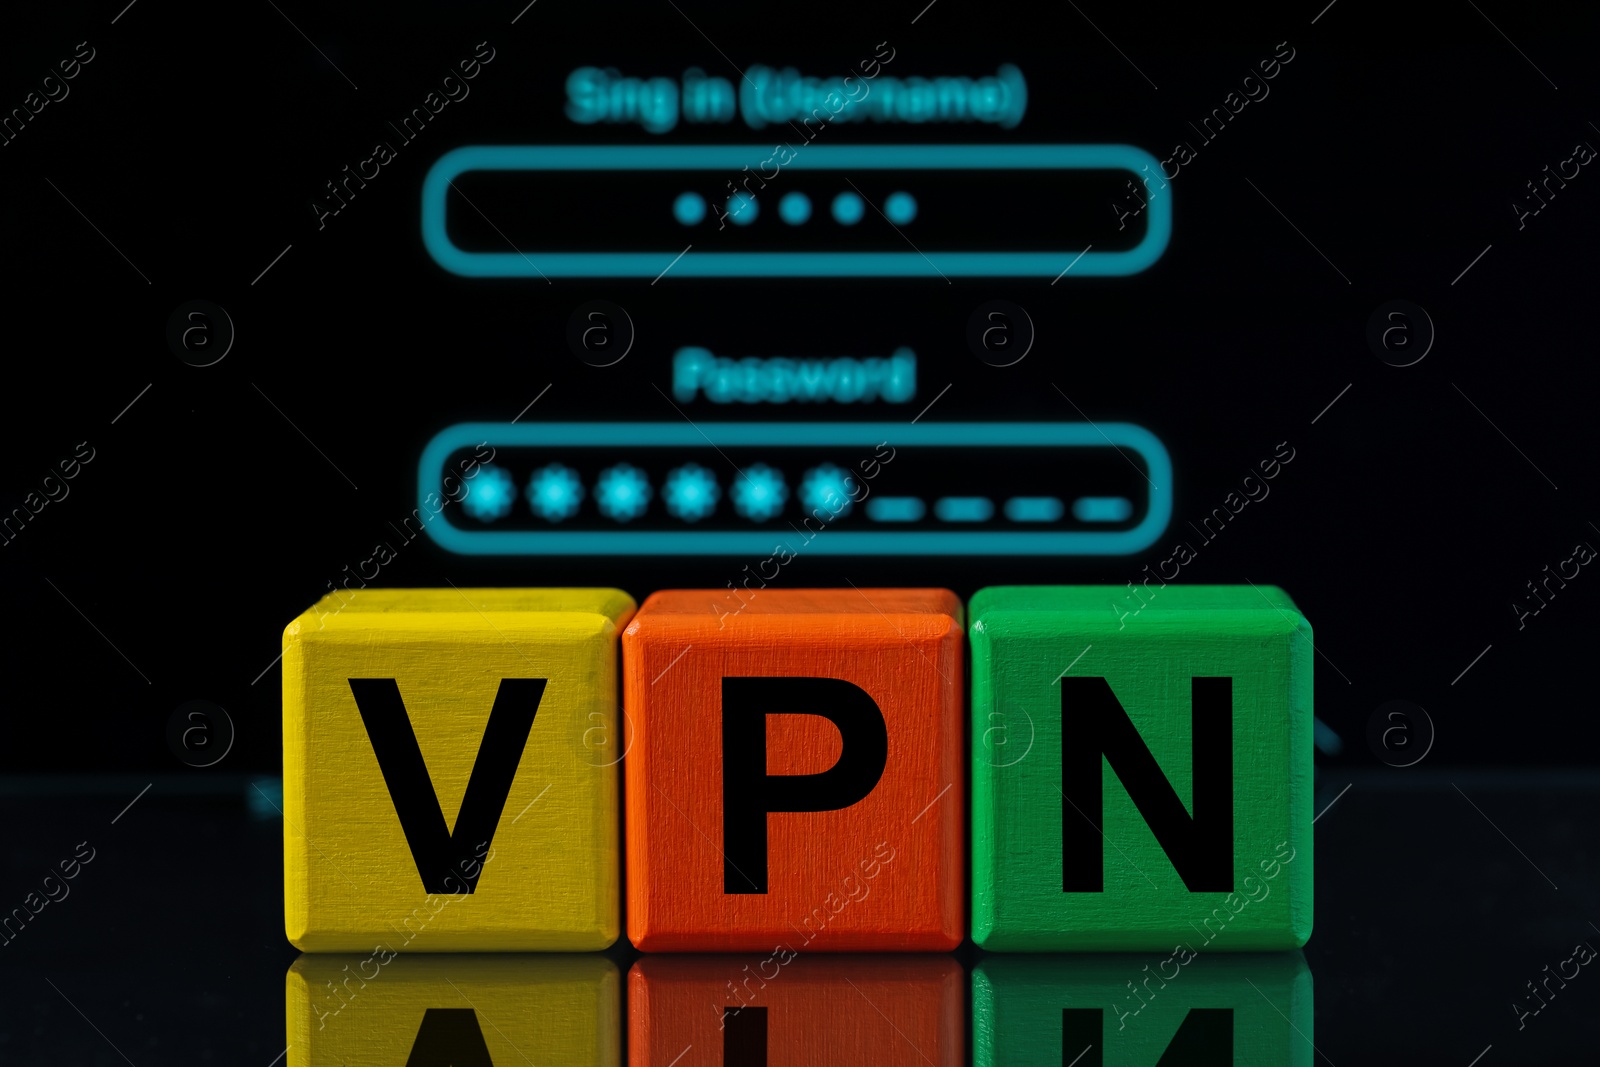 Photo of Acronym VPN (Virtual Private Network) made of colorful cubes on dark background